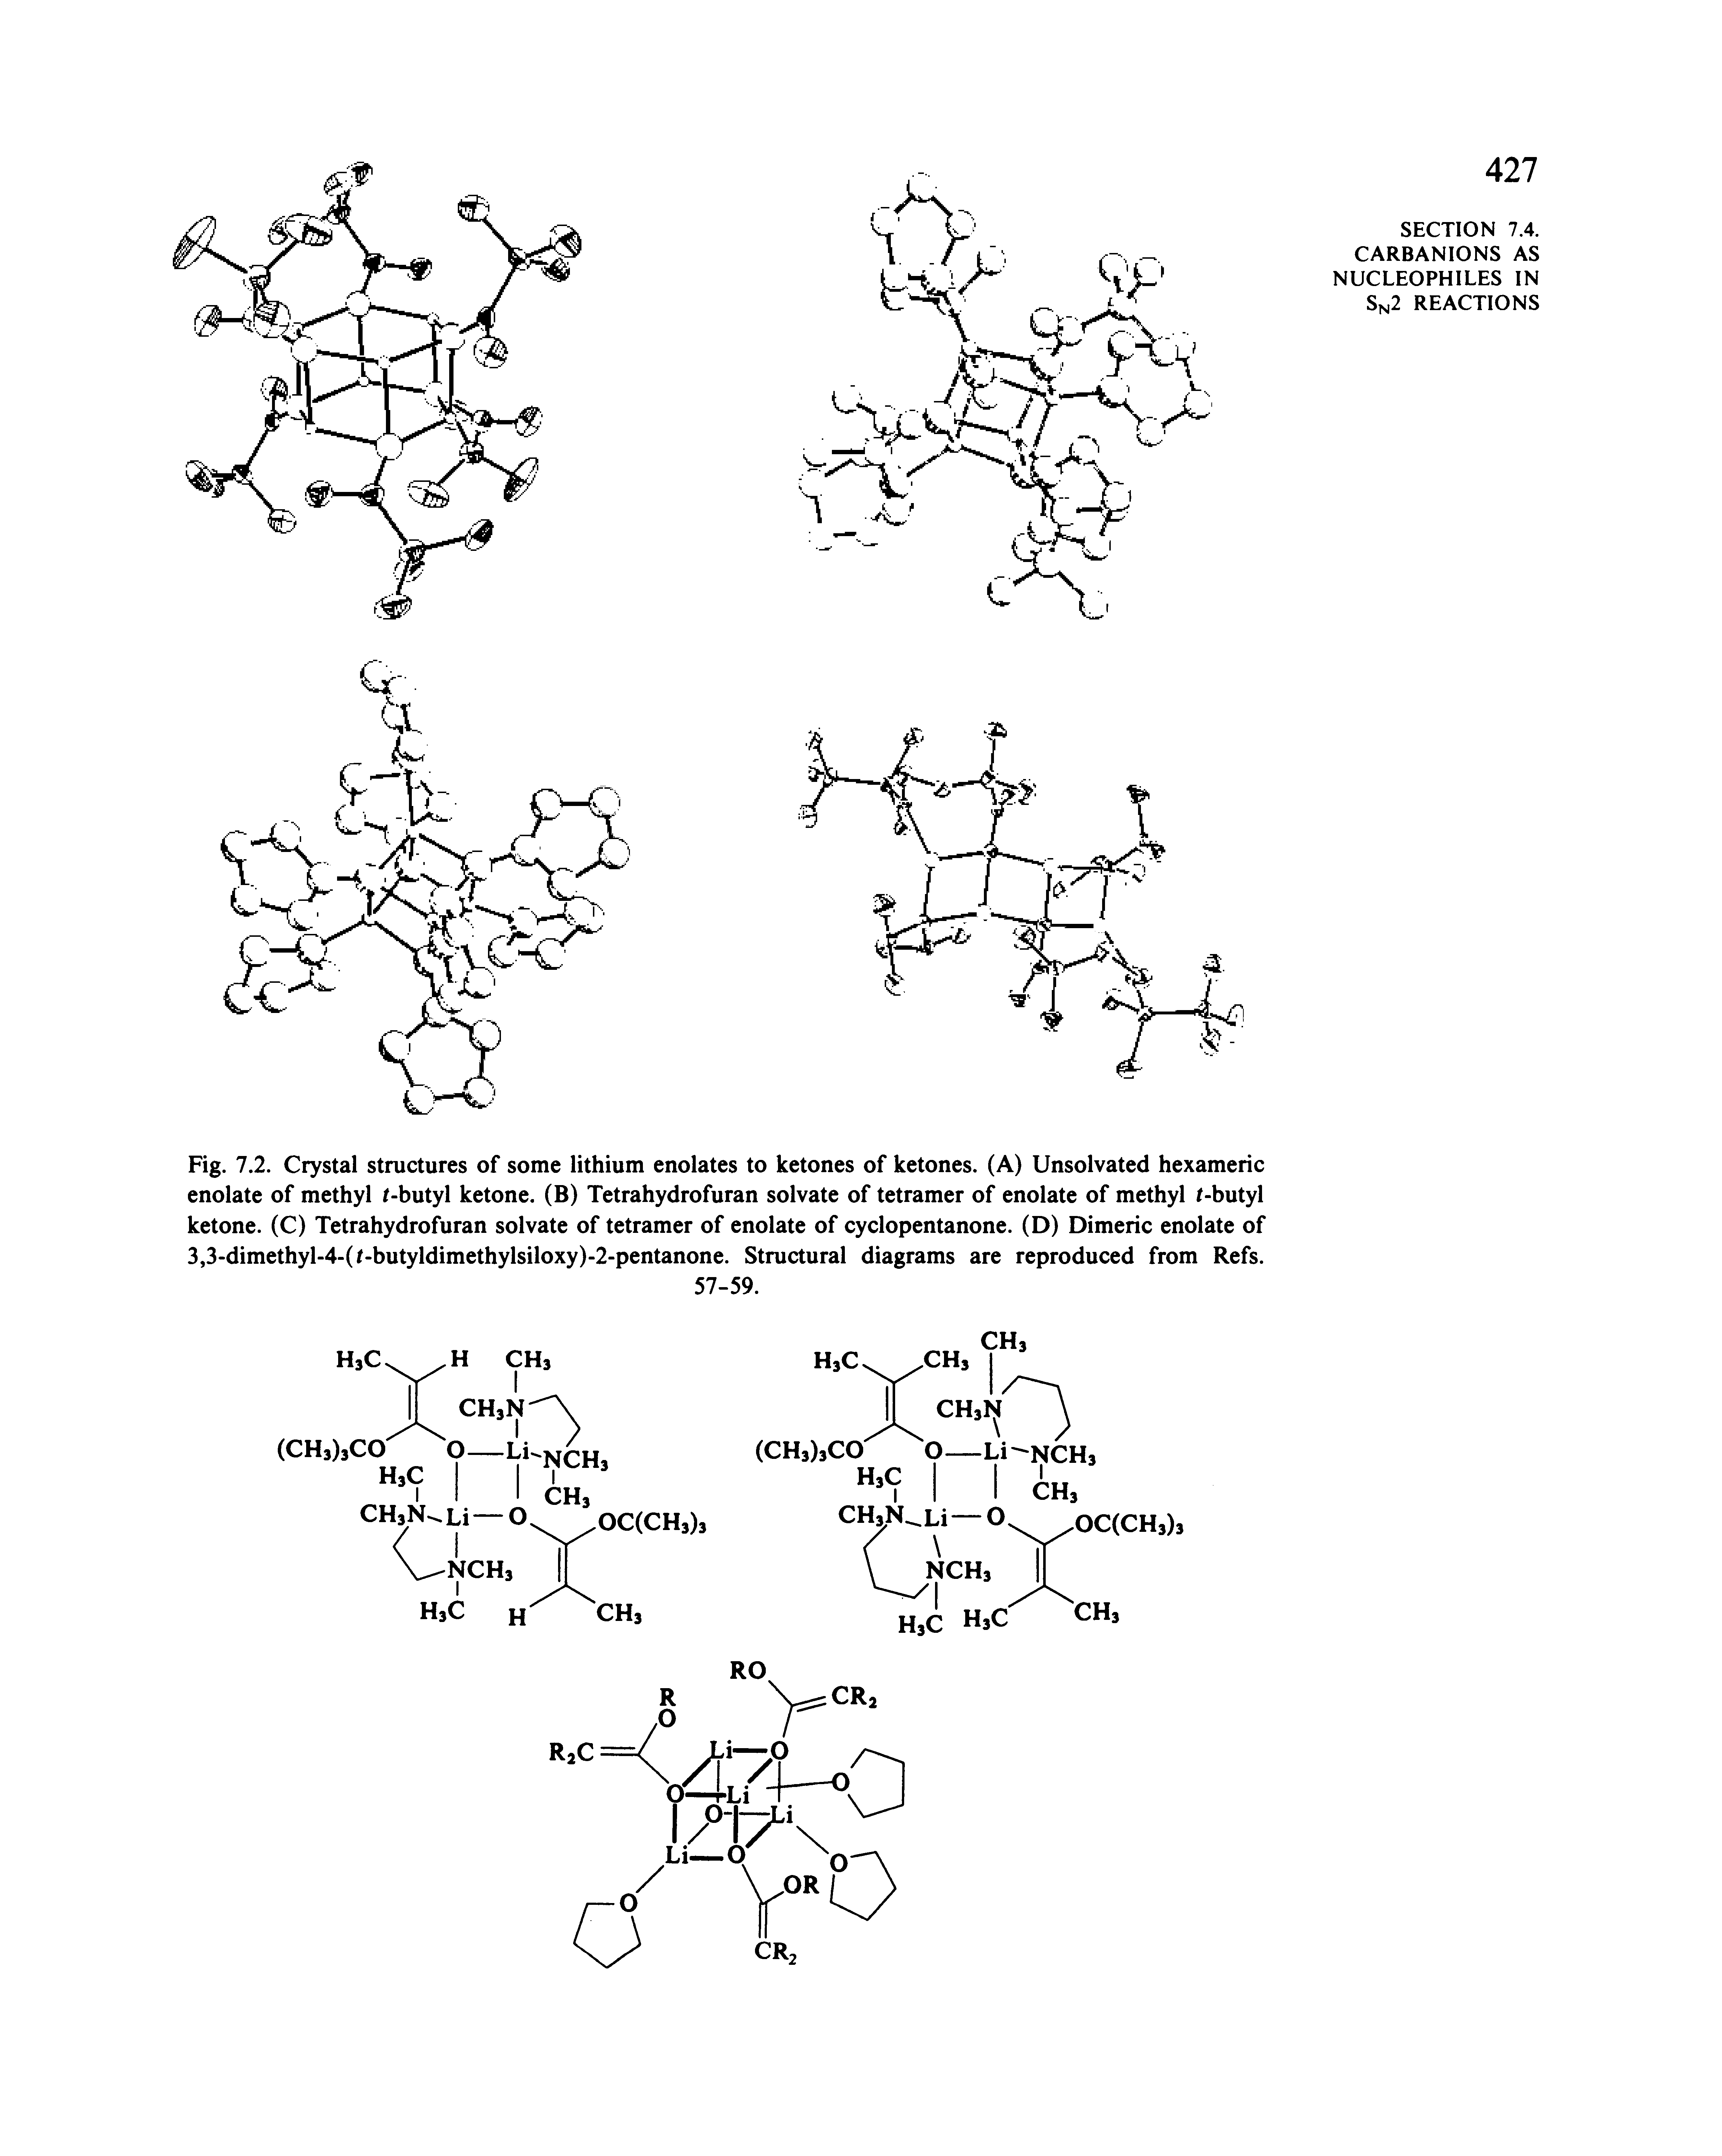 Fig. 7.2. Crystal structures of some lithium enolates to ketones of ketones. (A) Unsolvated hexameric enolate of methyl t-butyl ketone. (B) Tetrahydrofuran solvate of tetramer of enolate of methyl t-butyl ketone. (C) Tetrahydrofuran solvate of tetramer of enolate of cyclopentanone. (D) Dimeric enolate of 3,3-dimethyl-4-(t-butyldimethylsiloxy)-2-pentanone. Structural diagrams are reproduced from Refs.